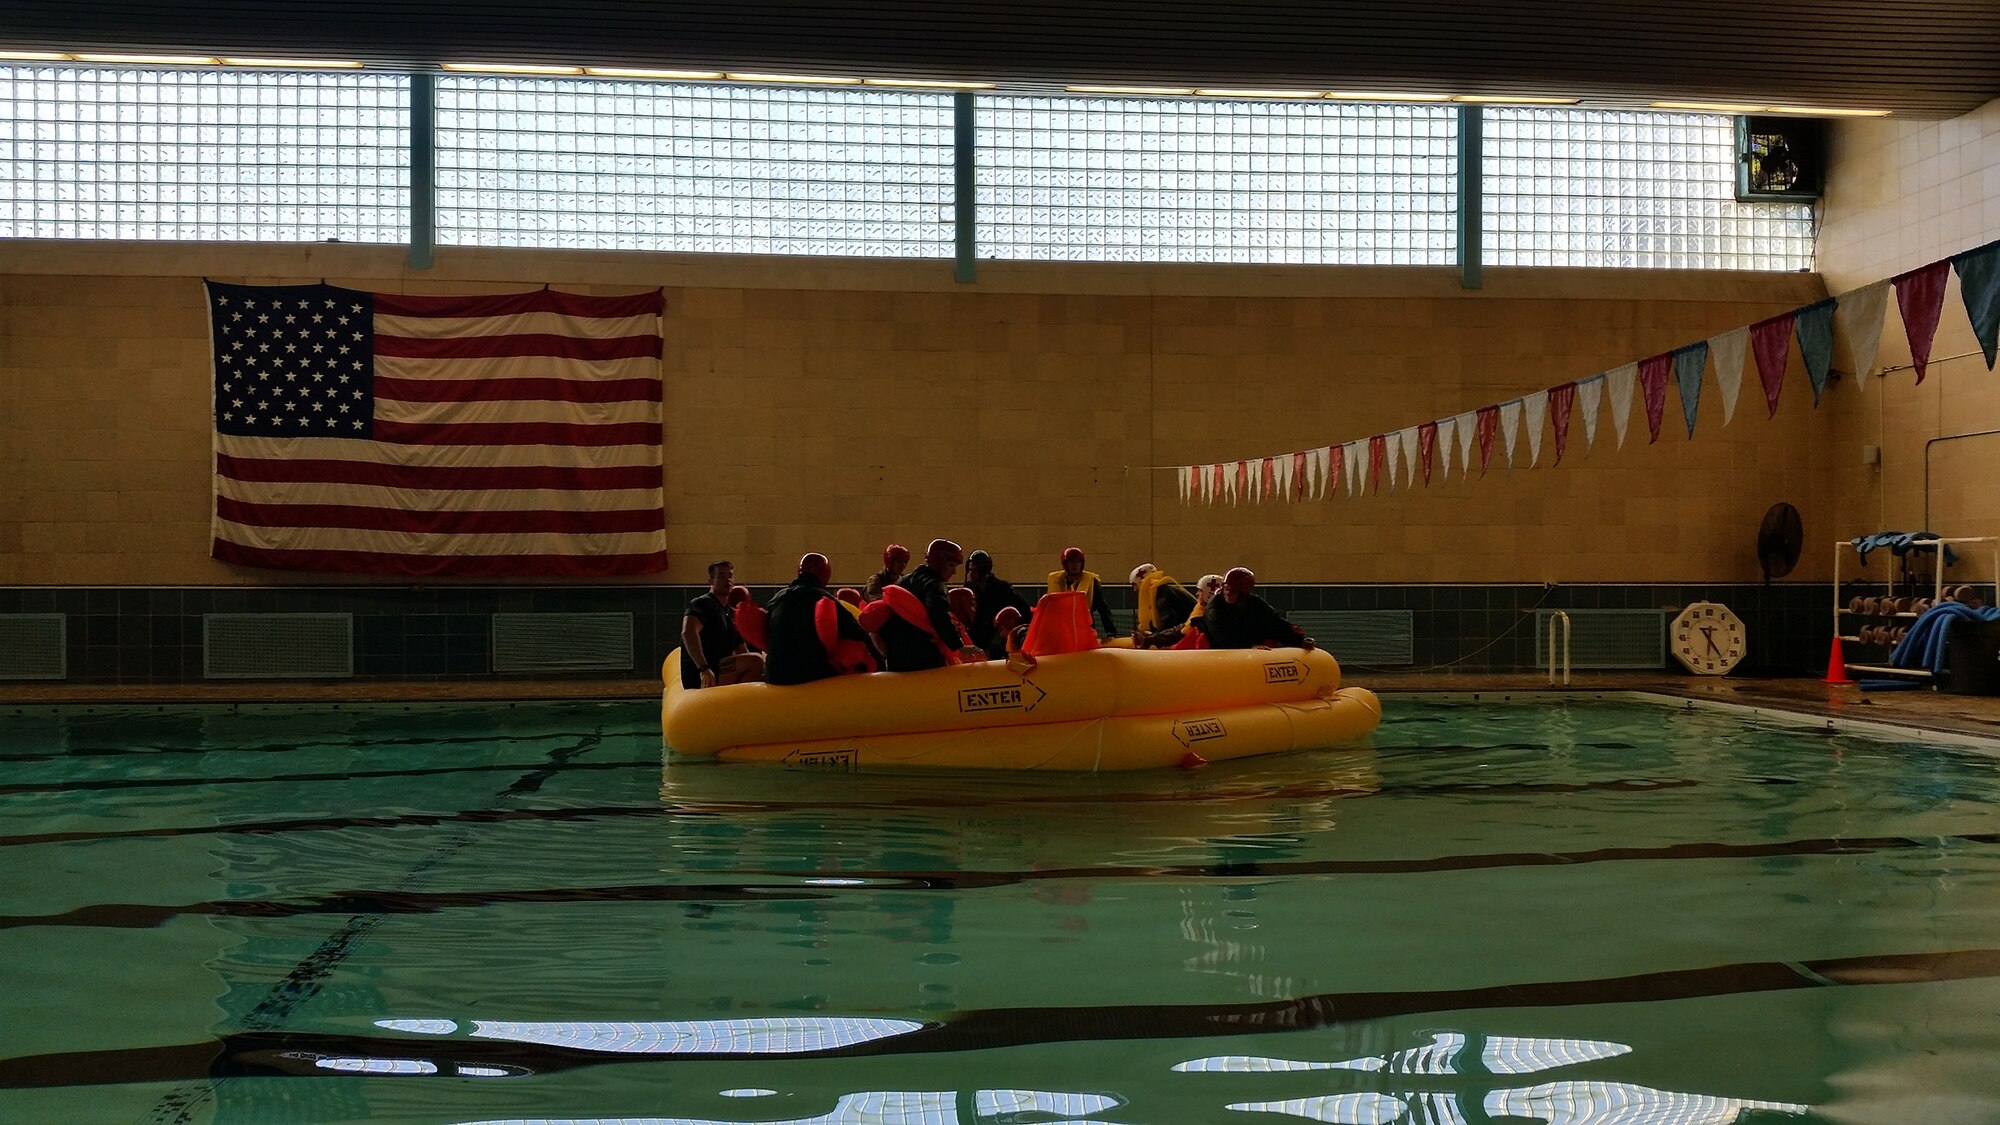 WRIGHT-PATTERSON AIR FORCE BASE, Ohio – Airmen assigned to the 89th Airlift Squadron and 445th Operations Support Squadron hone their water survival skills during a training scenario at the Dodge Gym here Oct. 4, 2015. During the semi-annual training, the Airmen were able to board a 25-man life raft and have the instructors from the 445th OSS aircrew flight equipment shop show them the different survival supplies that they can expect to find on a raft. While on the raft, the Airmen learned about raft care and maintenance, food and water procurement, first aid, protecting oneself from the outside elements, and signaling for help. (U.S. Air Force photo/Staff Sgt. Steven Sandmann)